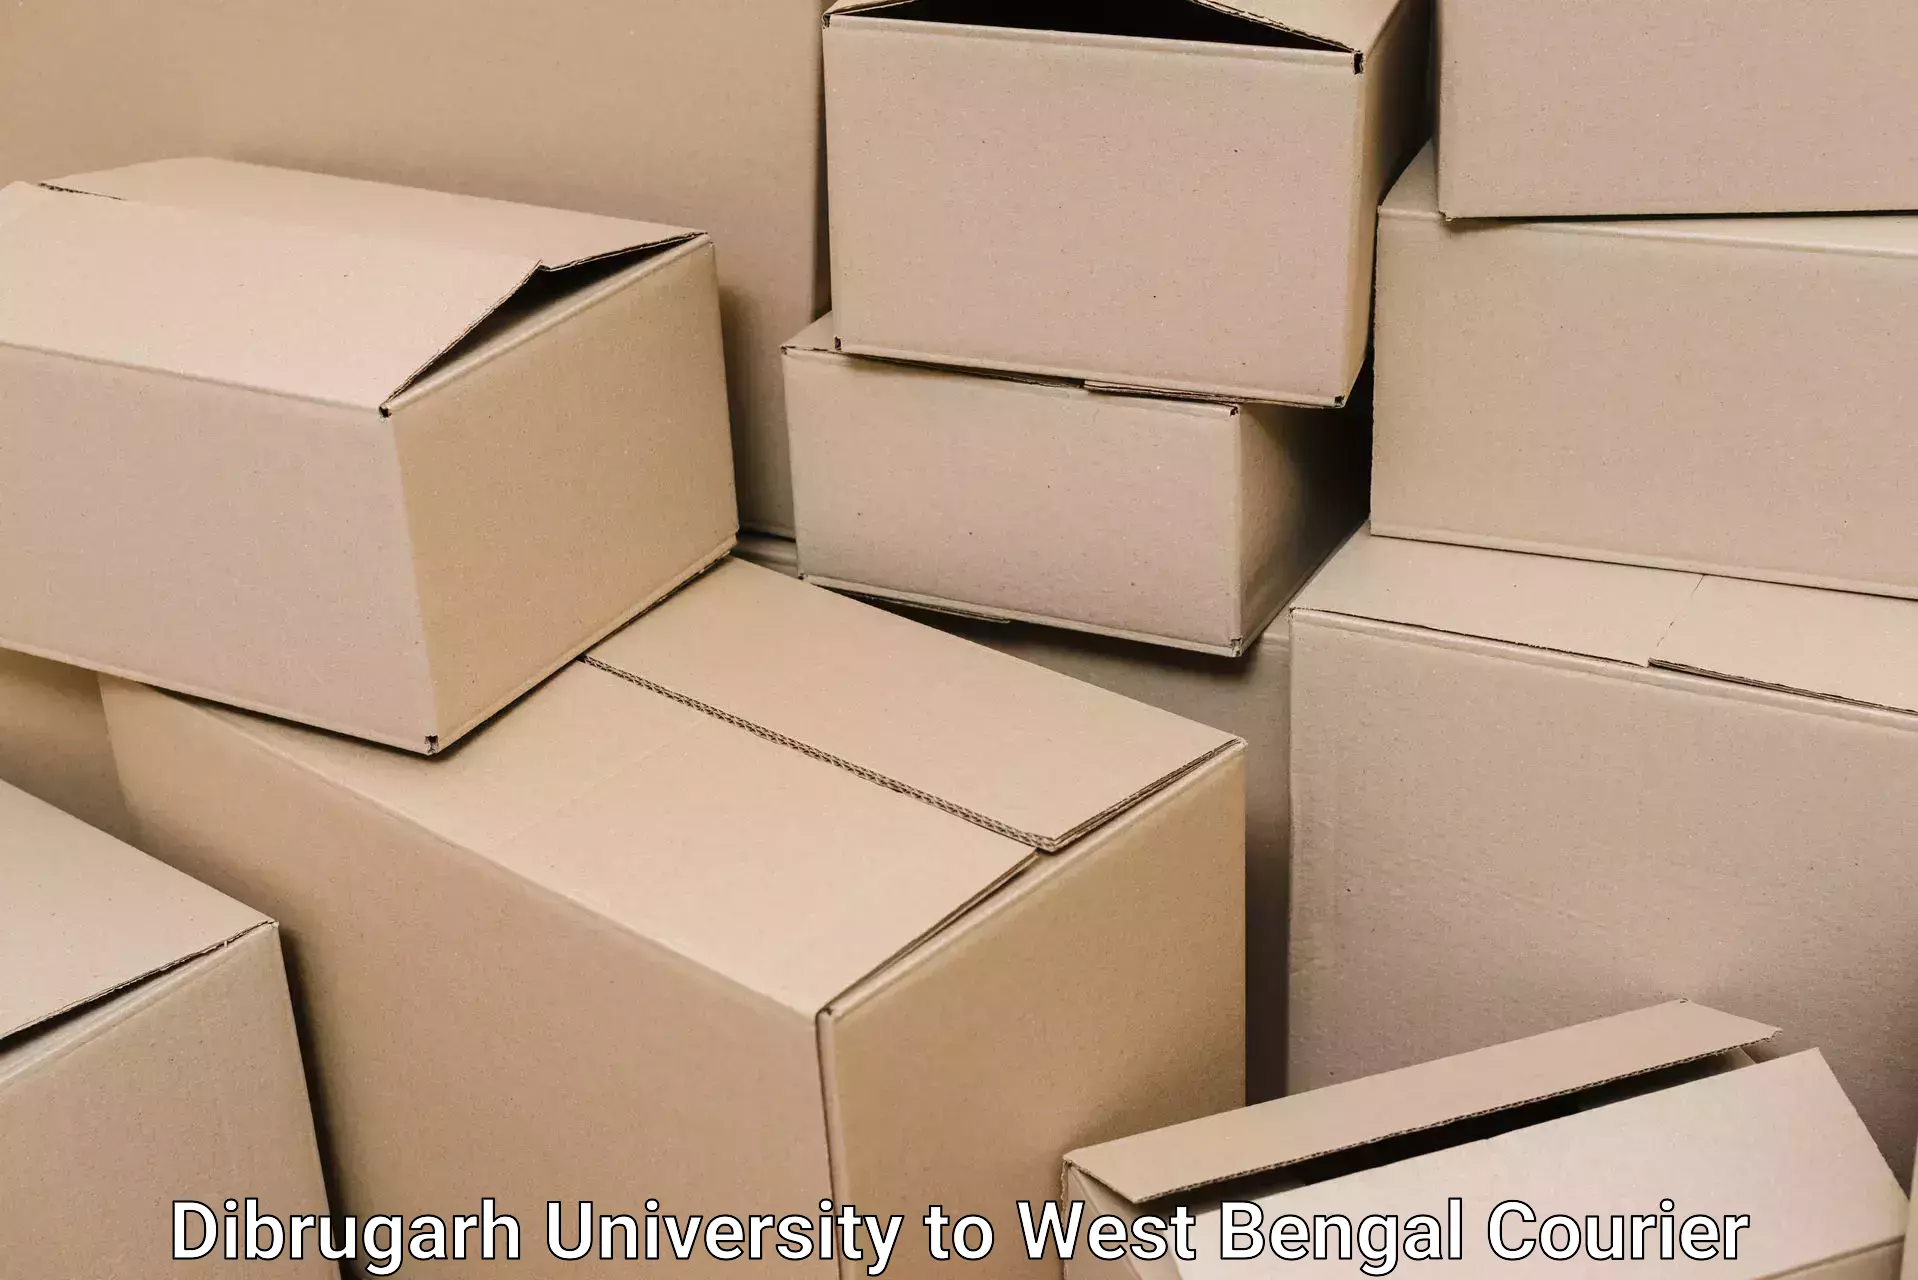 Professional moving assistance Dibrugarh University to West Bengal